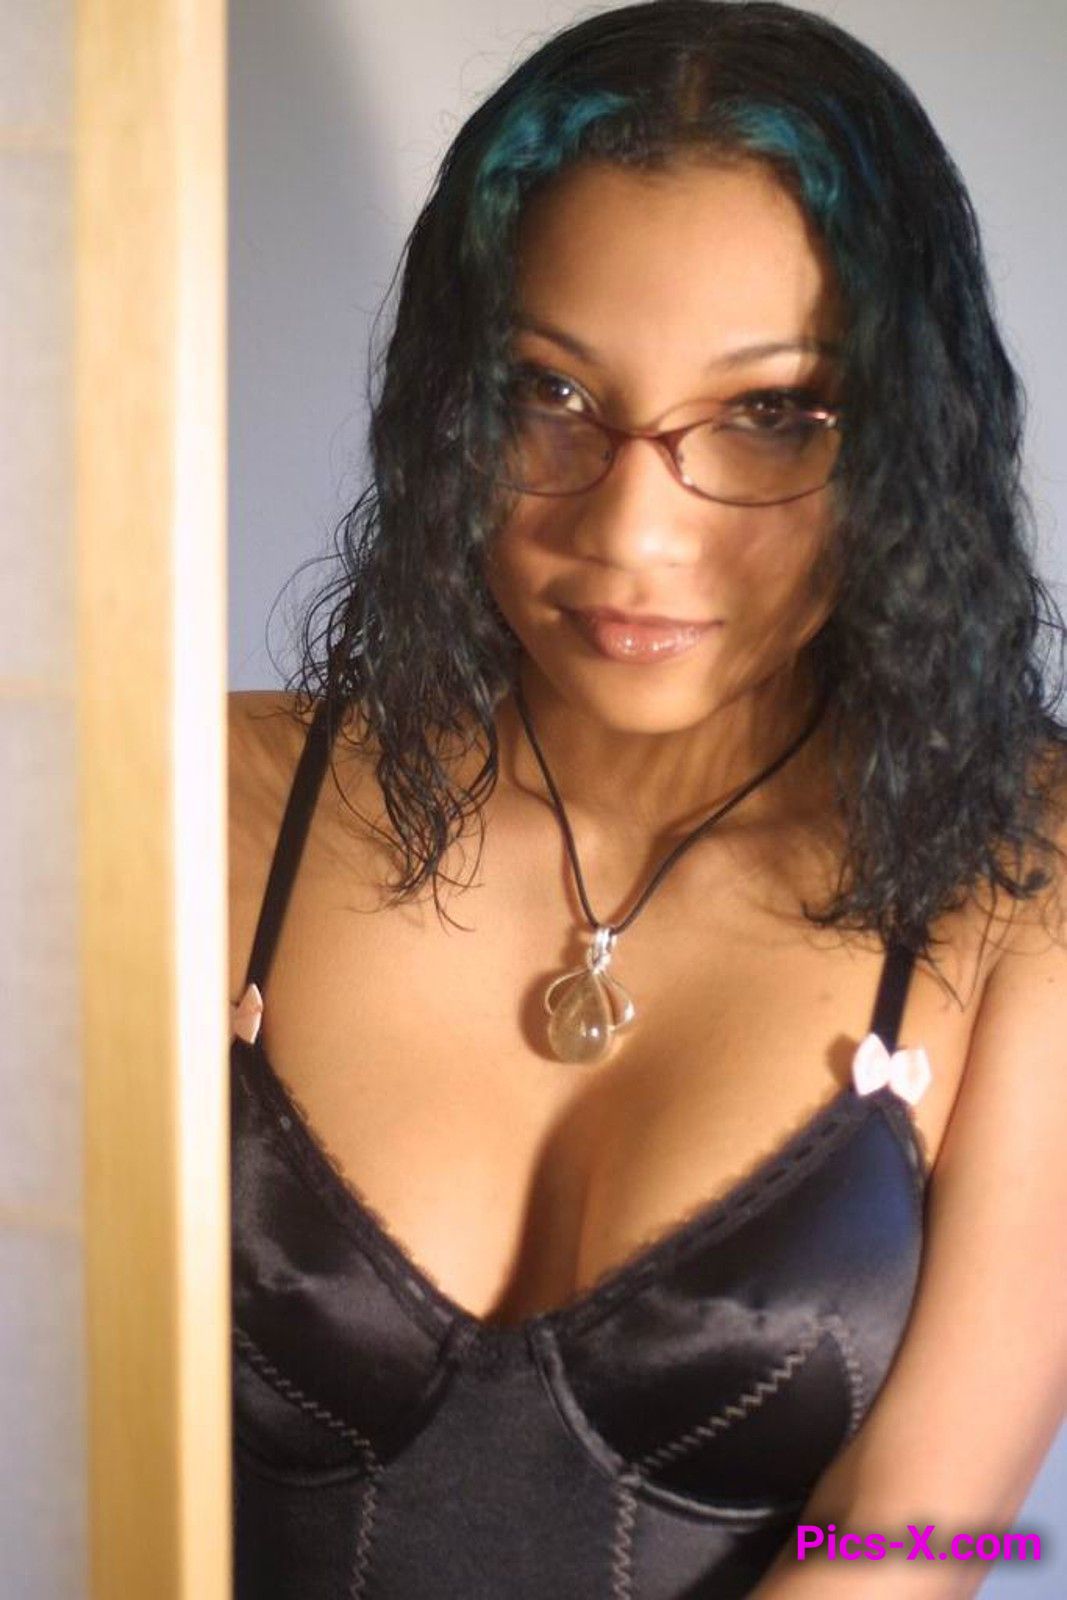 Exotic looking babe posing naked except for her glasses - Punk Rock Girlfriend - Image 1